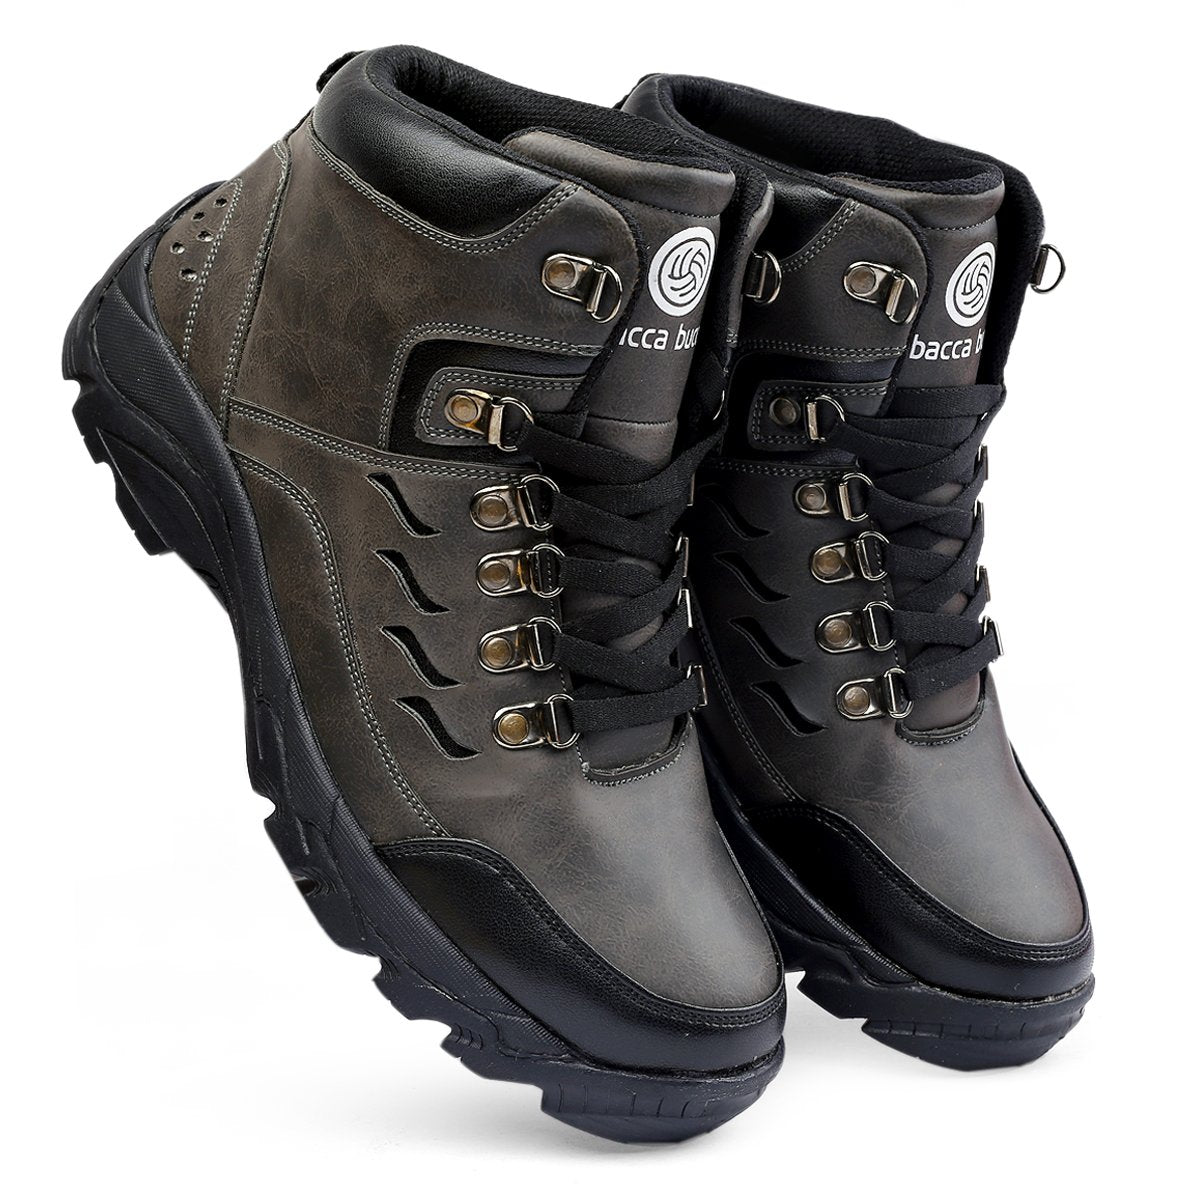 men snow boots, waterproof boots, high top ankle boots